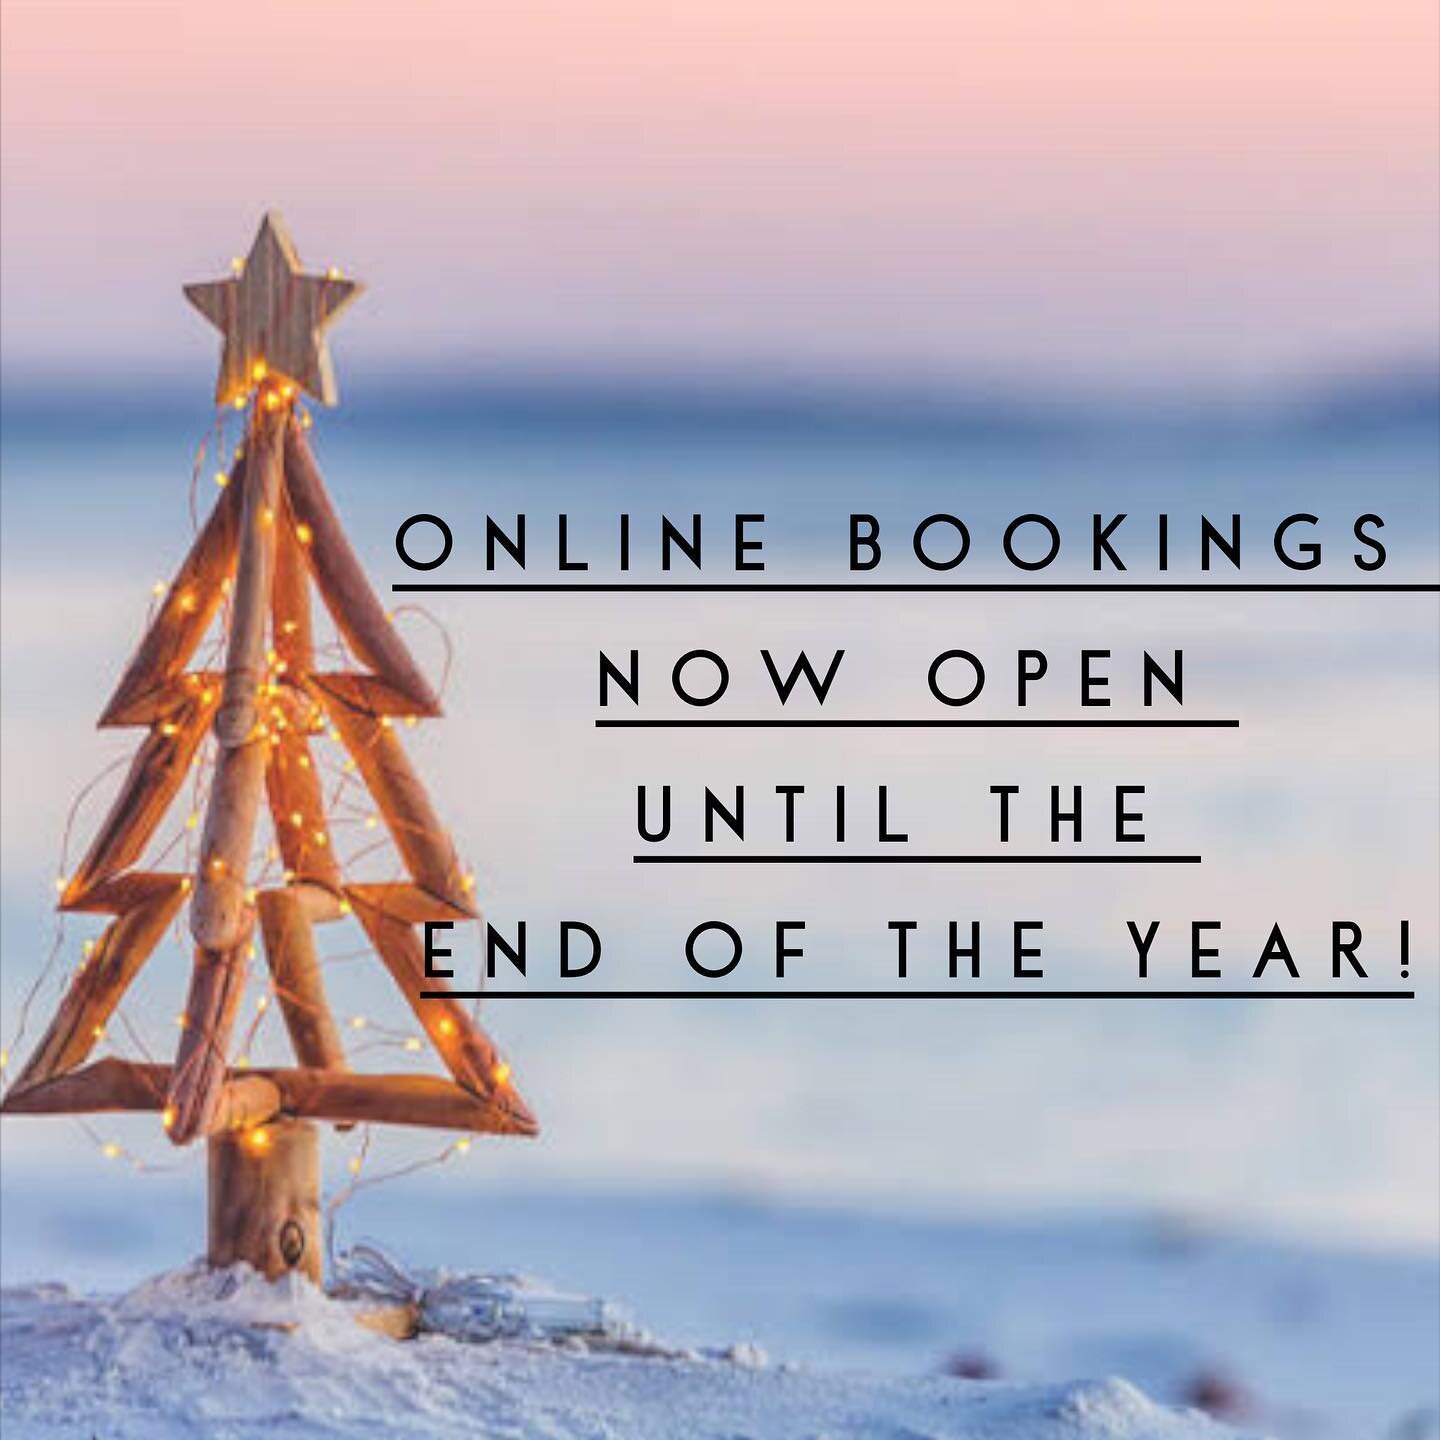 🌹 Online Bookings are now open until the end of the year 🌹 

📅 Online bookings -
https://bookings.gettimely.com/glamourbeauty/bb/book

To view or change an existing booking-
https://bookings.gettimely.com/glamourbeauty/

🌸💕🌸💕